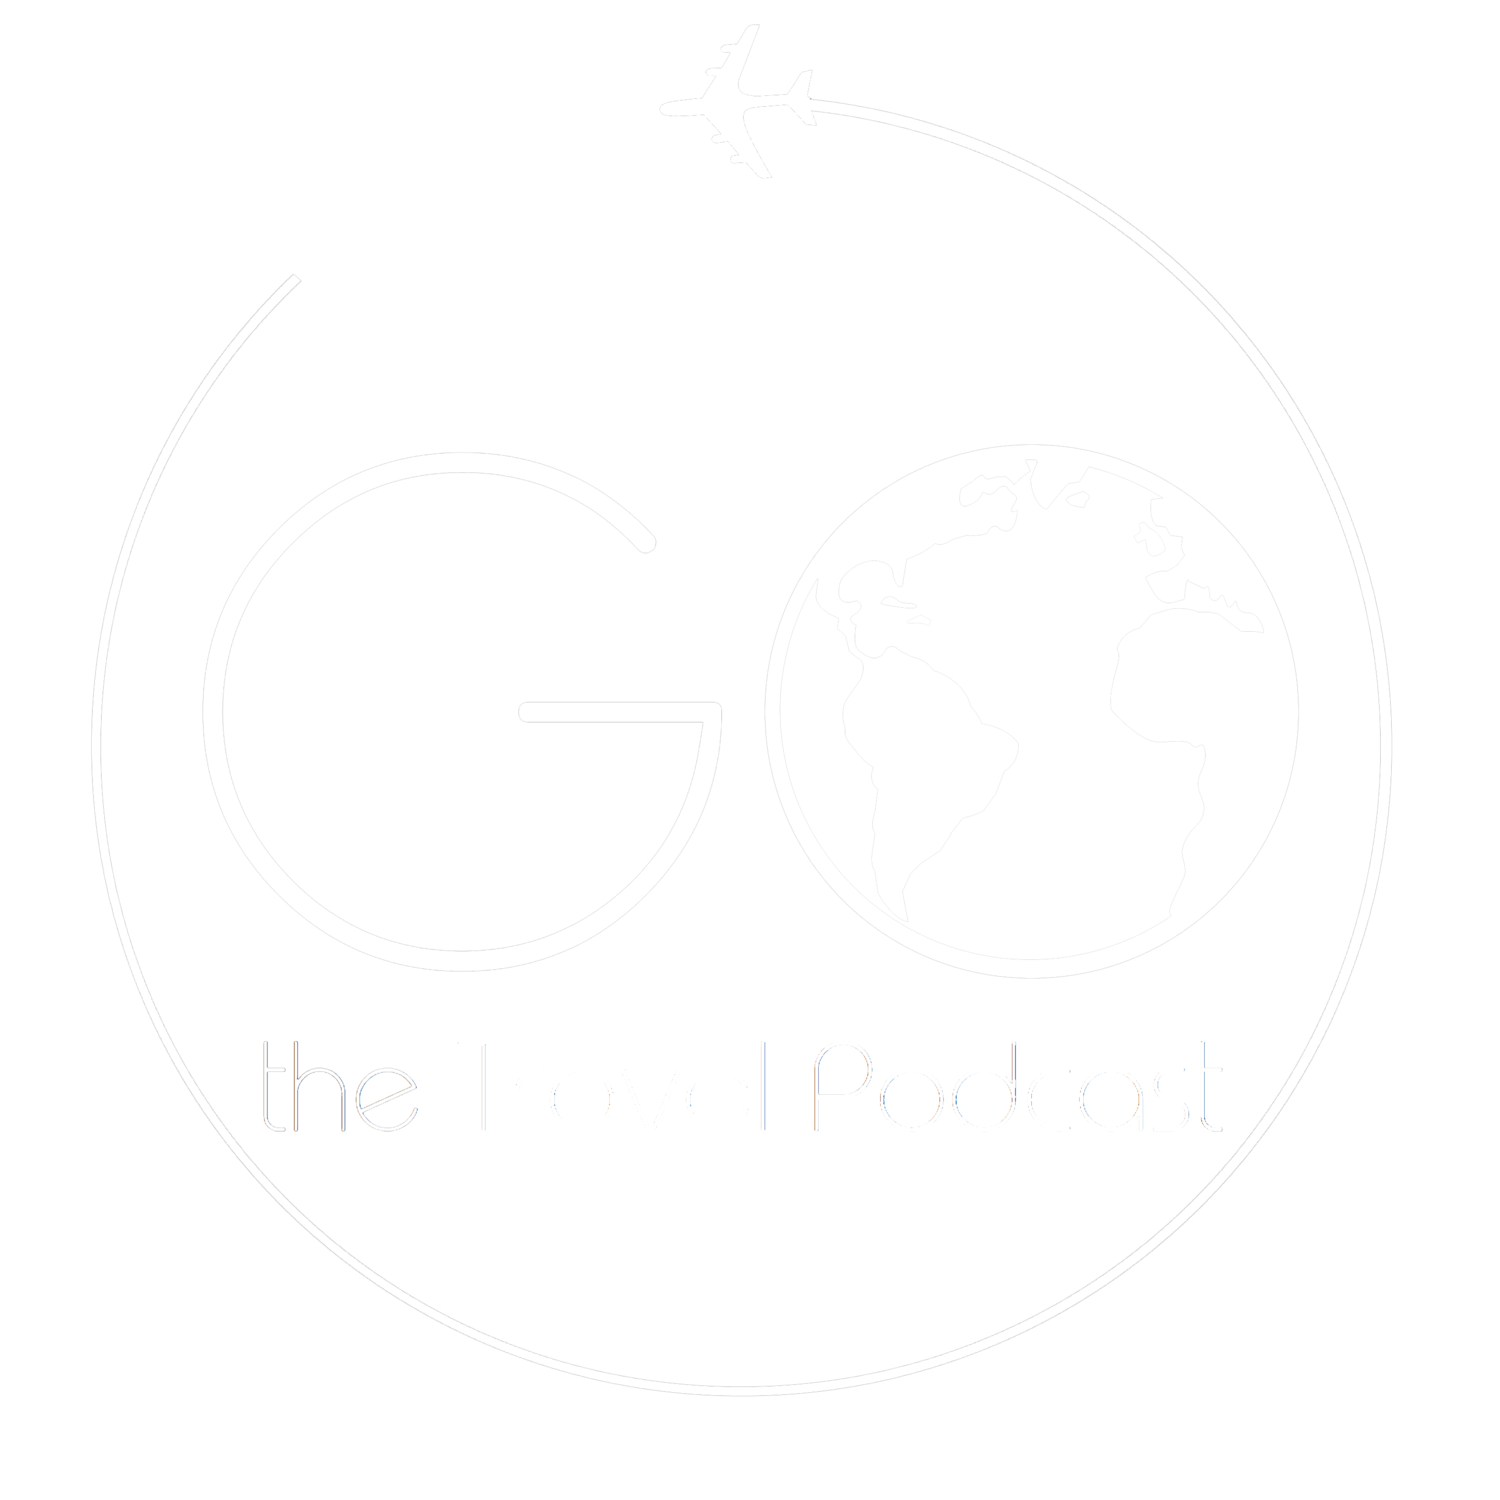 Go the travel podcast